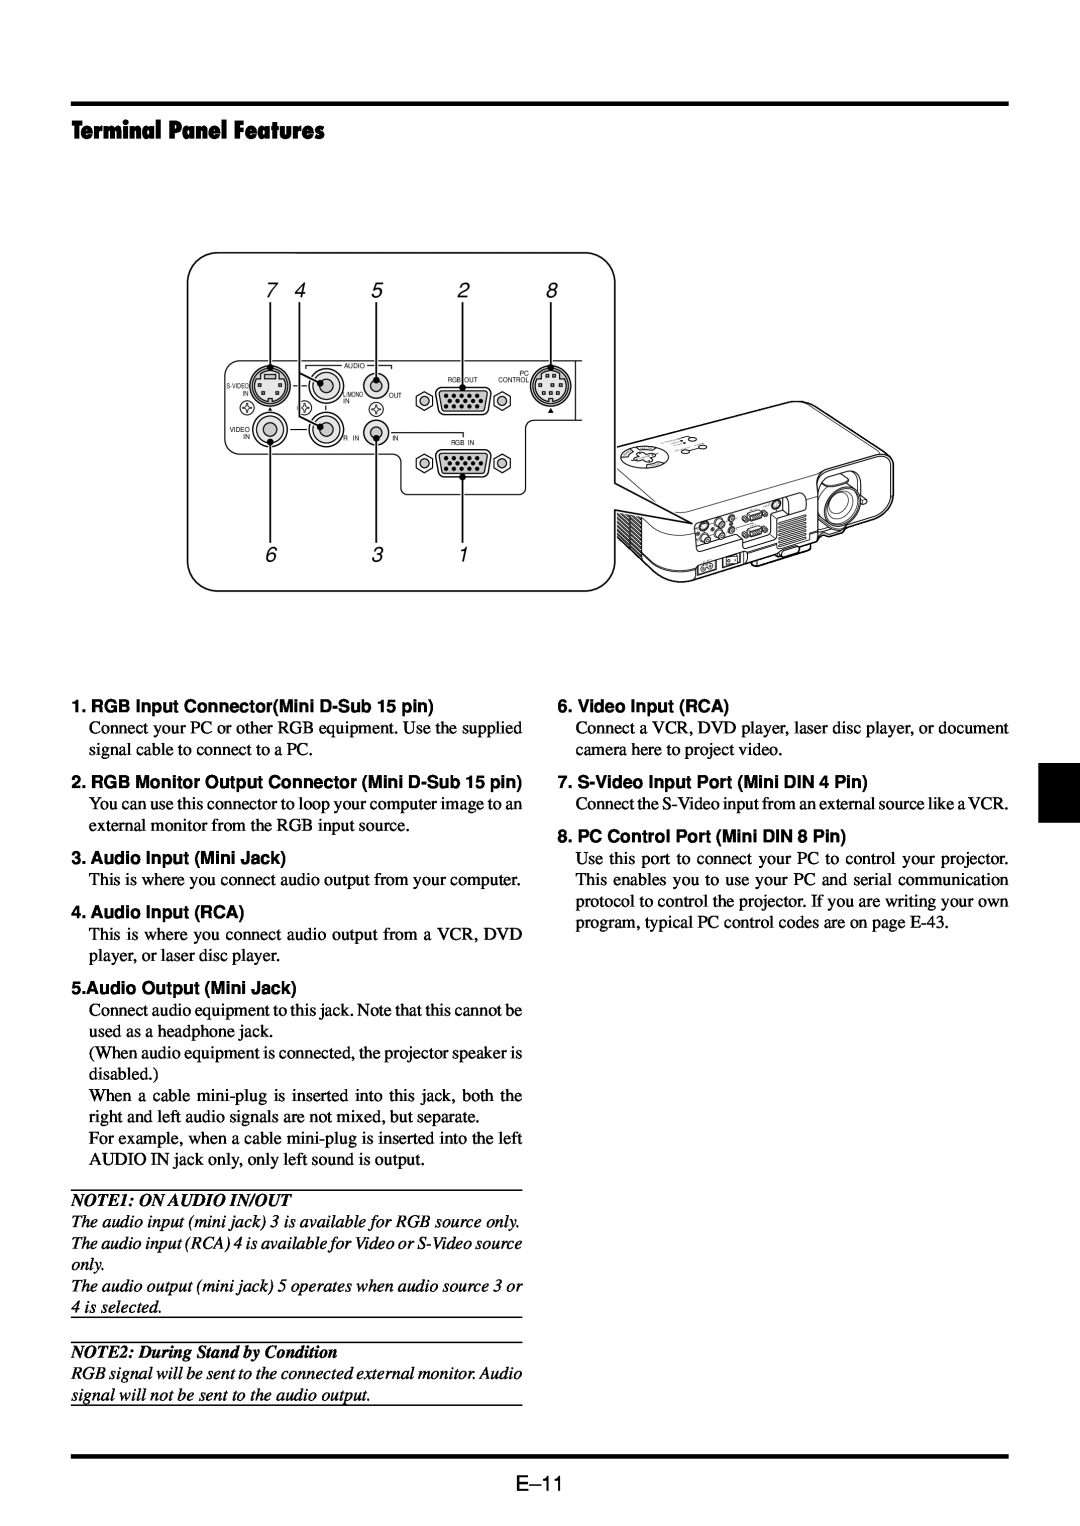 NEC VT45 user manual Terminal Panel Features, E-11, NOTE1 ON AUDIO IN/OUT, NOTE2 During Stand by Condition 